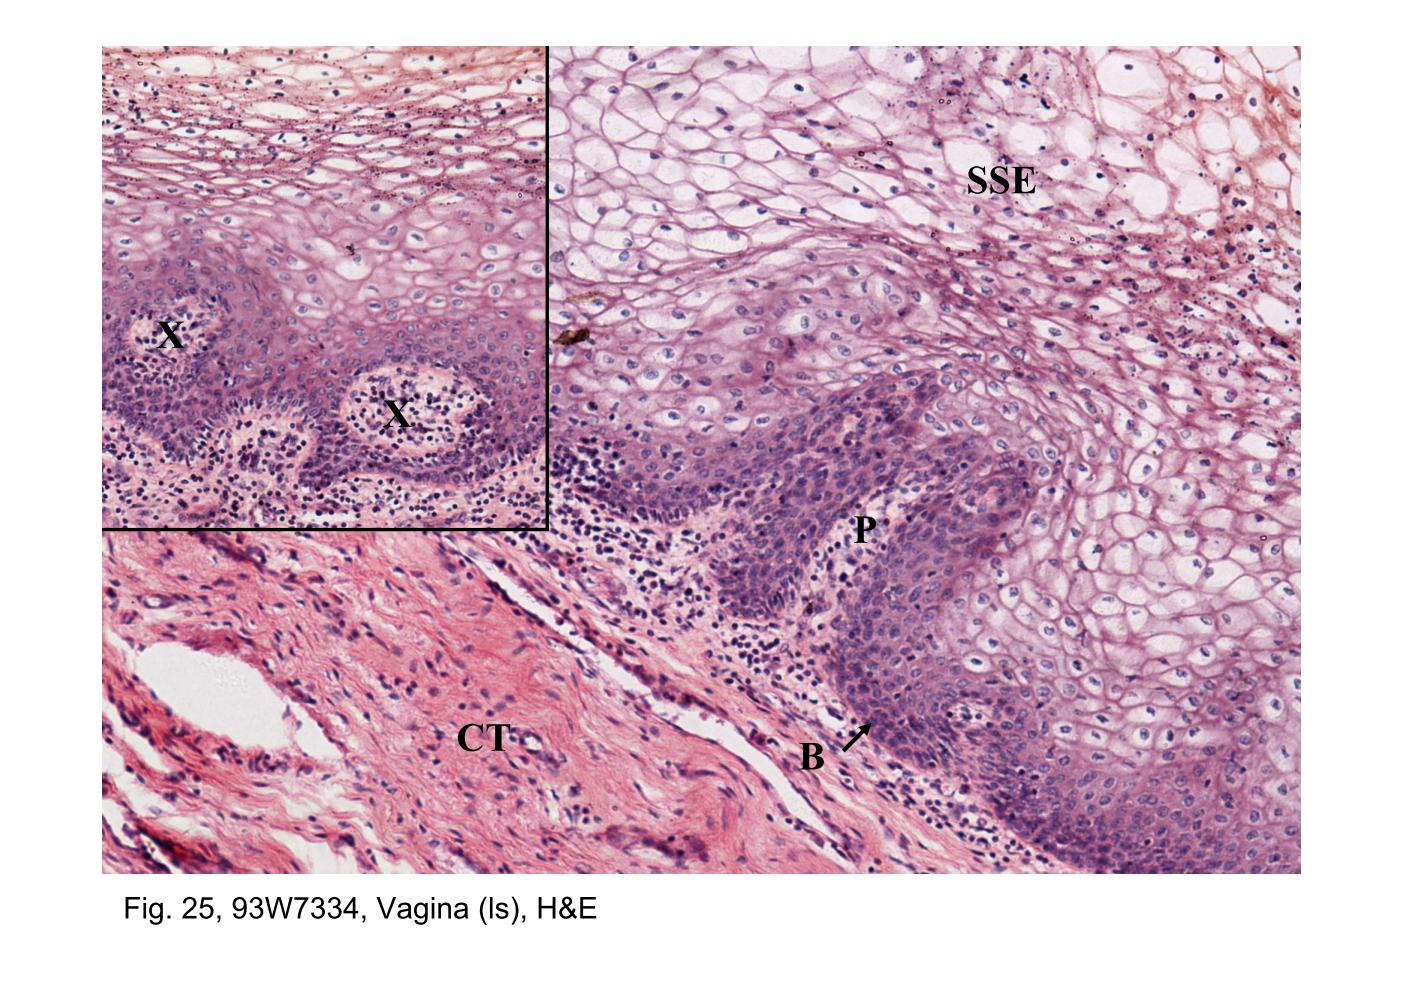 block14_49.jpg - Fig. 25, 93W7334, Vagina (ls), H&EThe mucosa of the vagina consists of a stratified squamous epithelium (SSE)   and an underlying fibrous connective tissue (CT) that often appears more   cellular than other fibrous connective tissue. The boundary between the   two is readily identified because of the conspicuous staining of the   closely packed small cells of the basal layer (B) of the epithelium.   Connective tissue papillae (P) project into the underside of the epithelium,   giving the epithelial-connective tissue junction an uneven appearance.   The papillae may be cut obliquely or in cross section and thus may   appear as connective tissue islands (arrows; insert). The epithelium is   characteristically thick and although keratohyaline granules may be   found in the superficial cells, keratinization does not occur in human   vaginal epithelium. Thus, nuclei can be observed throughout the entire   thickness of the epithelium despite the fact that the cytoplasm of most of   the cells above the basal layers appears empty. These cells are normally   filled with large deposits of glycogen that is lost in the processes of   fixation and embedding of the tissue.